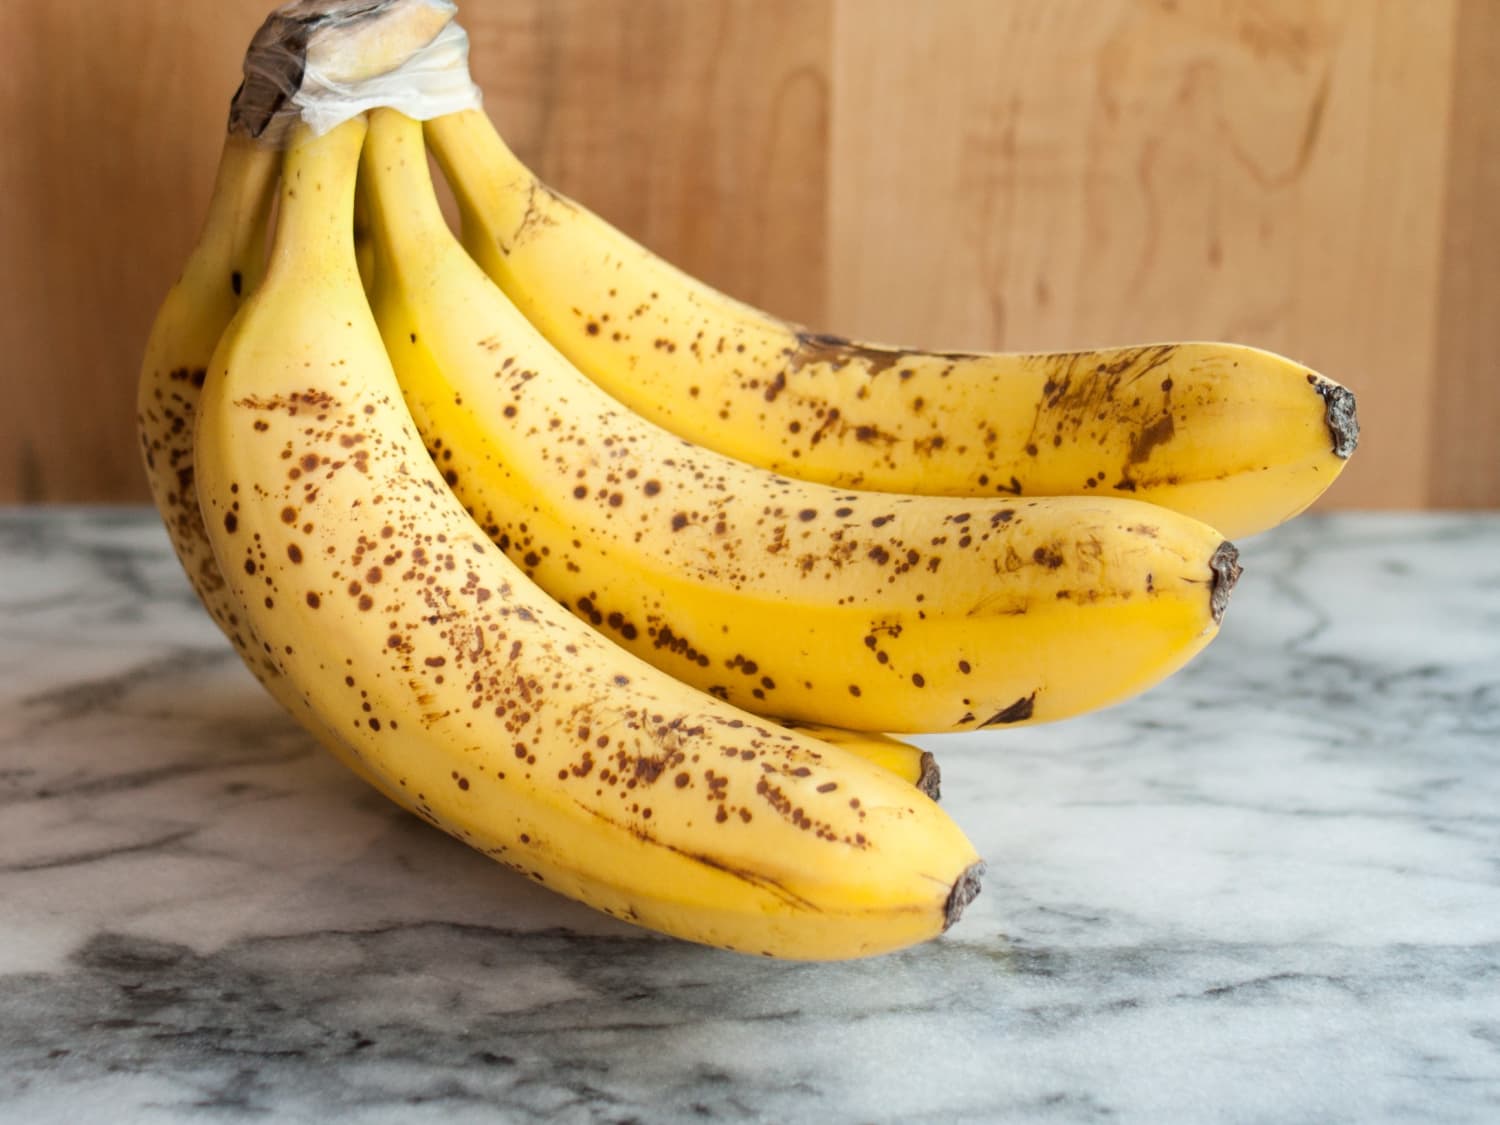 How To Pick The Best Bunch of Bananas | Kitchn